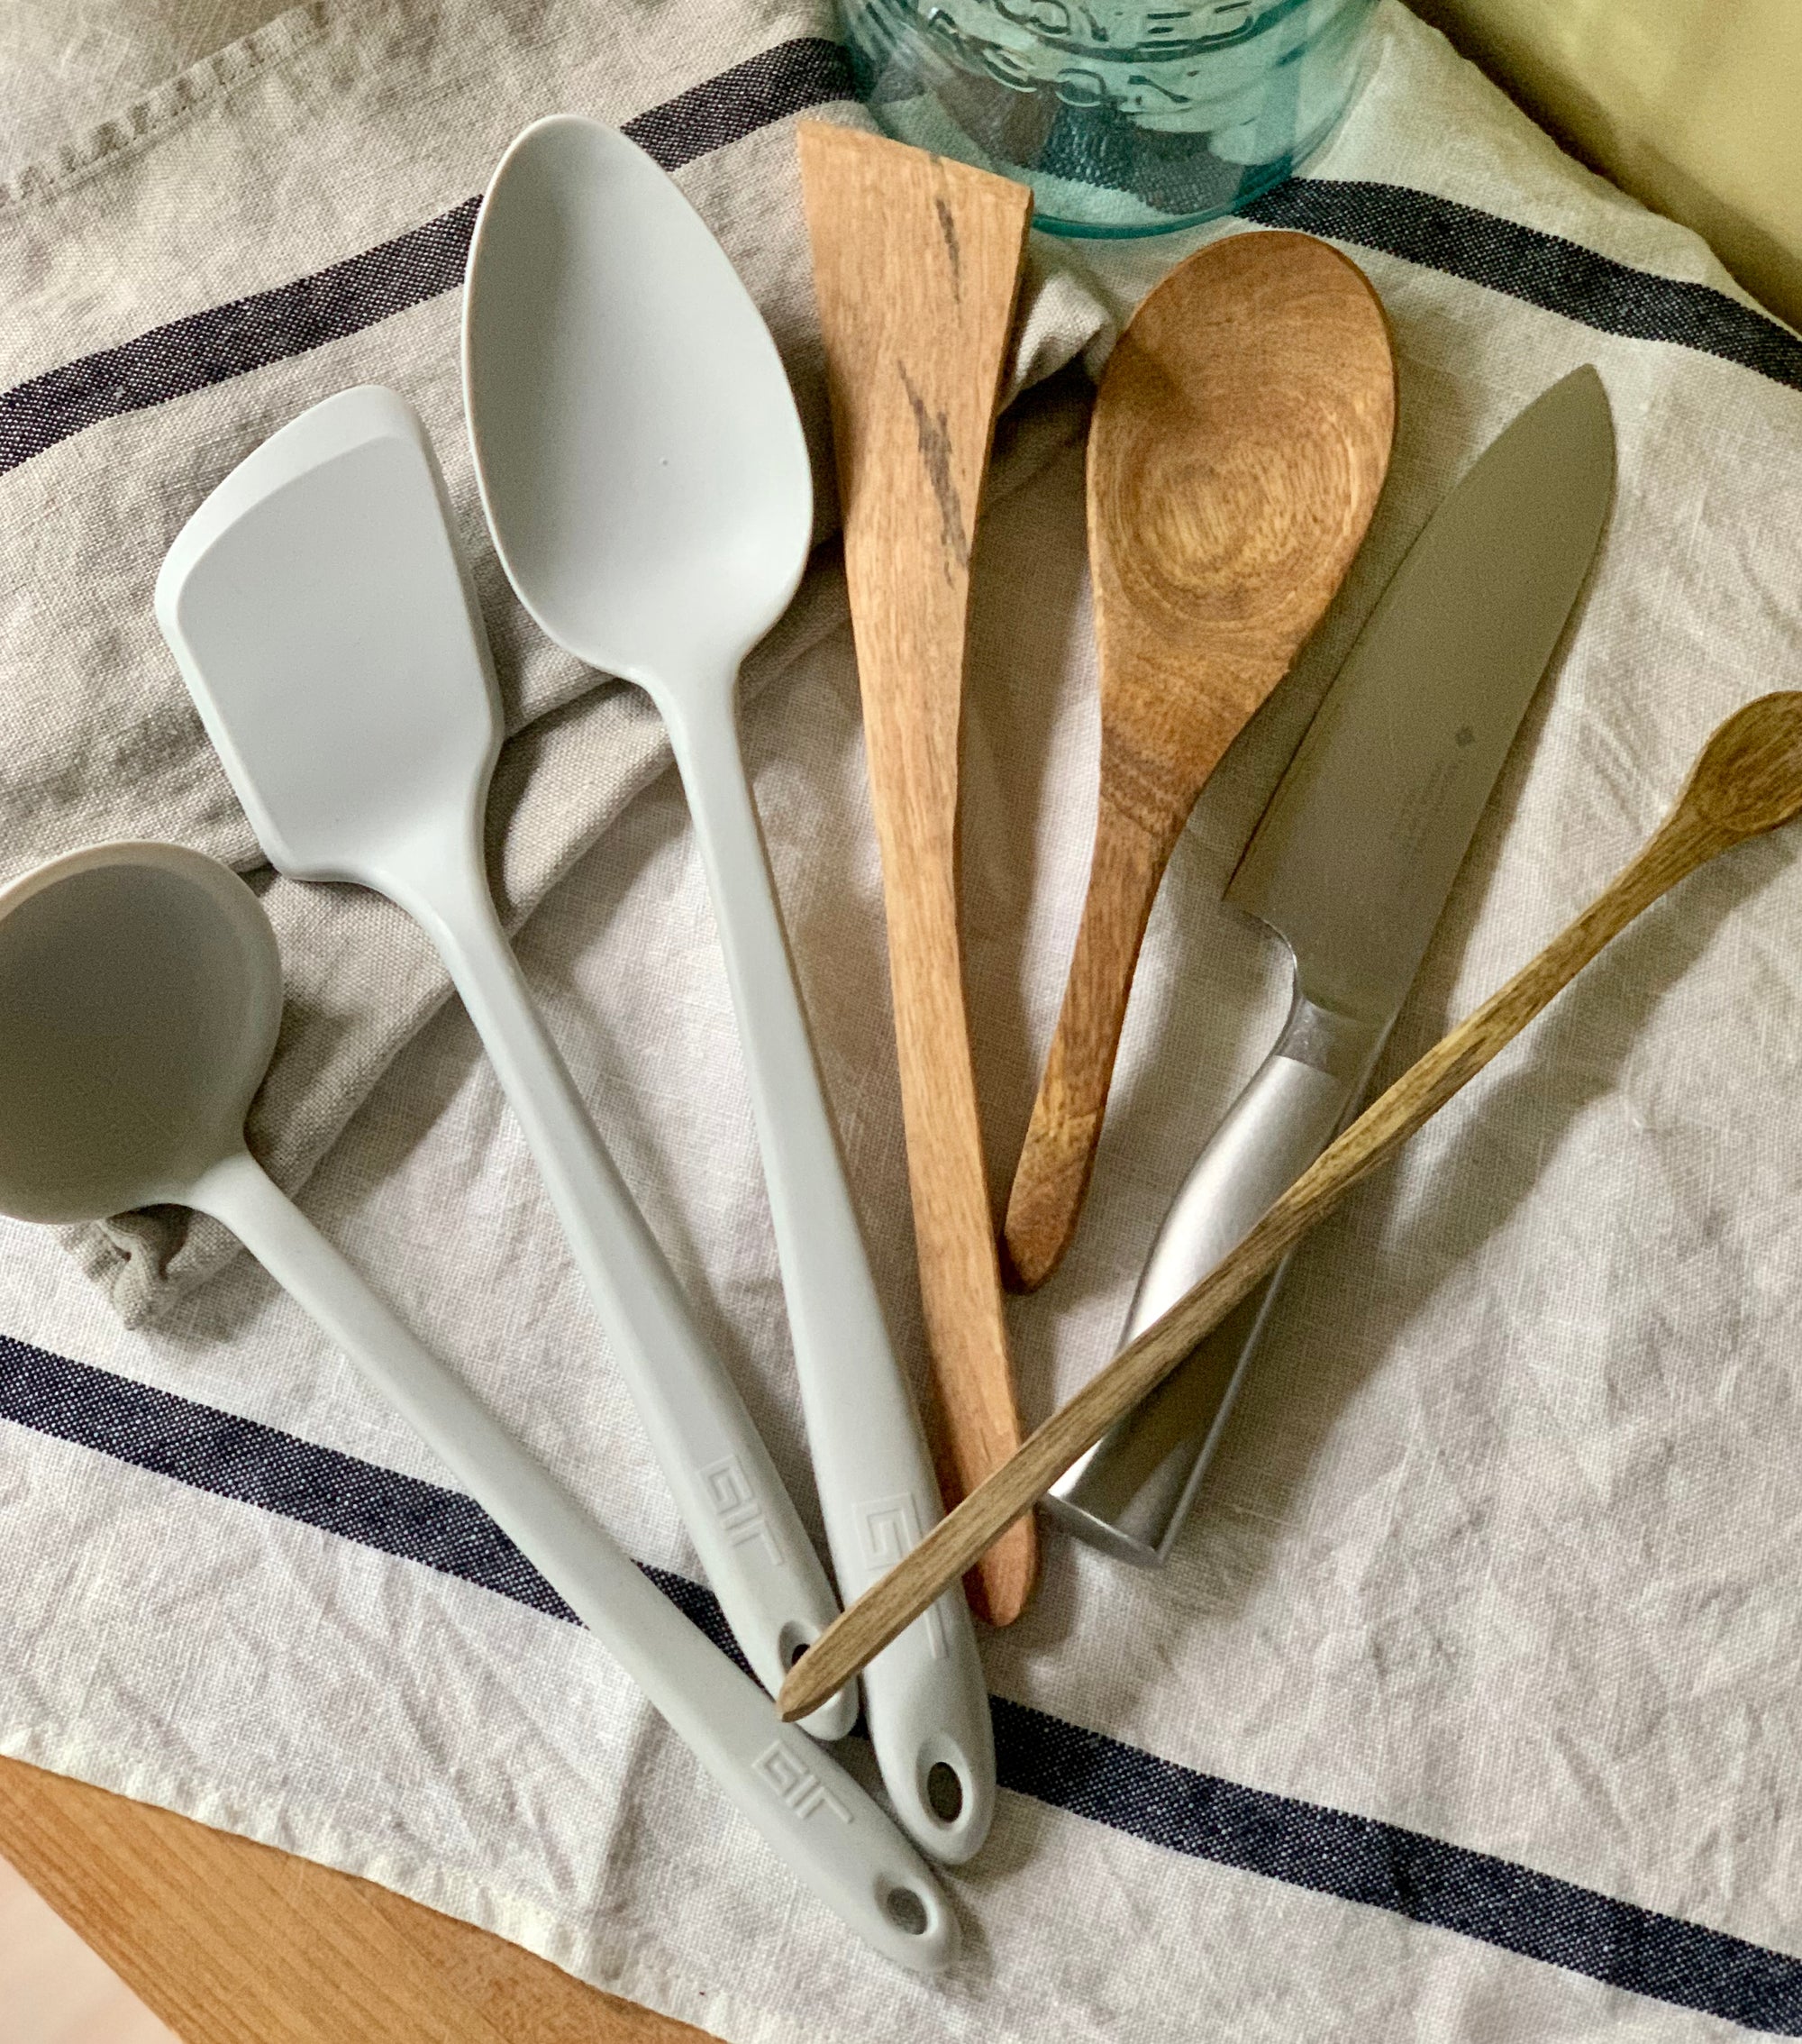 Simple Materials and Handcrafted Kitchen Utensils